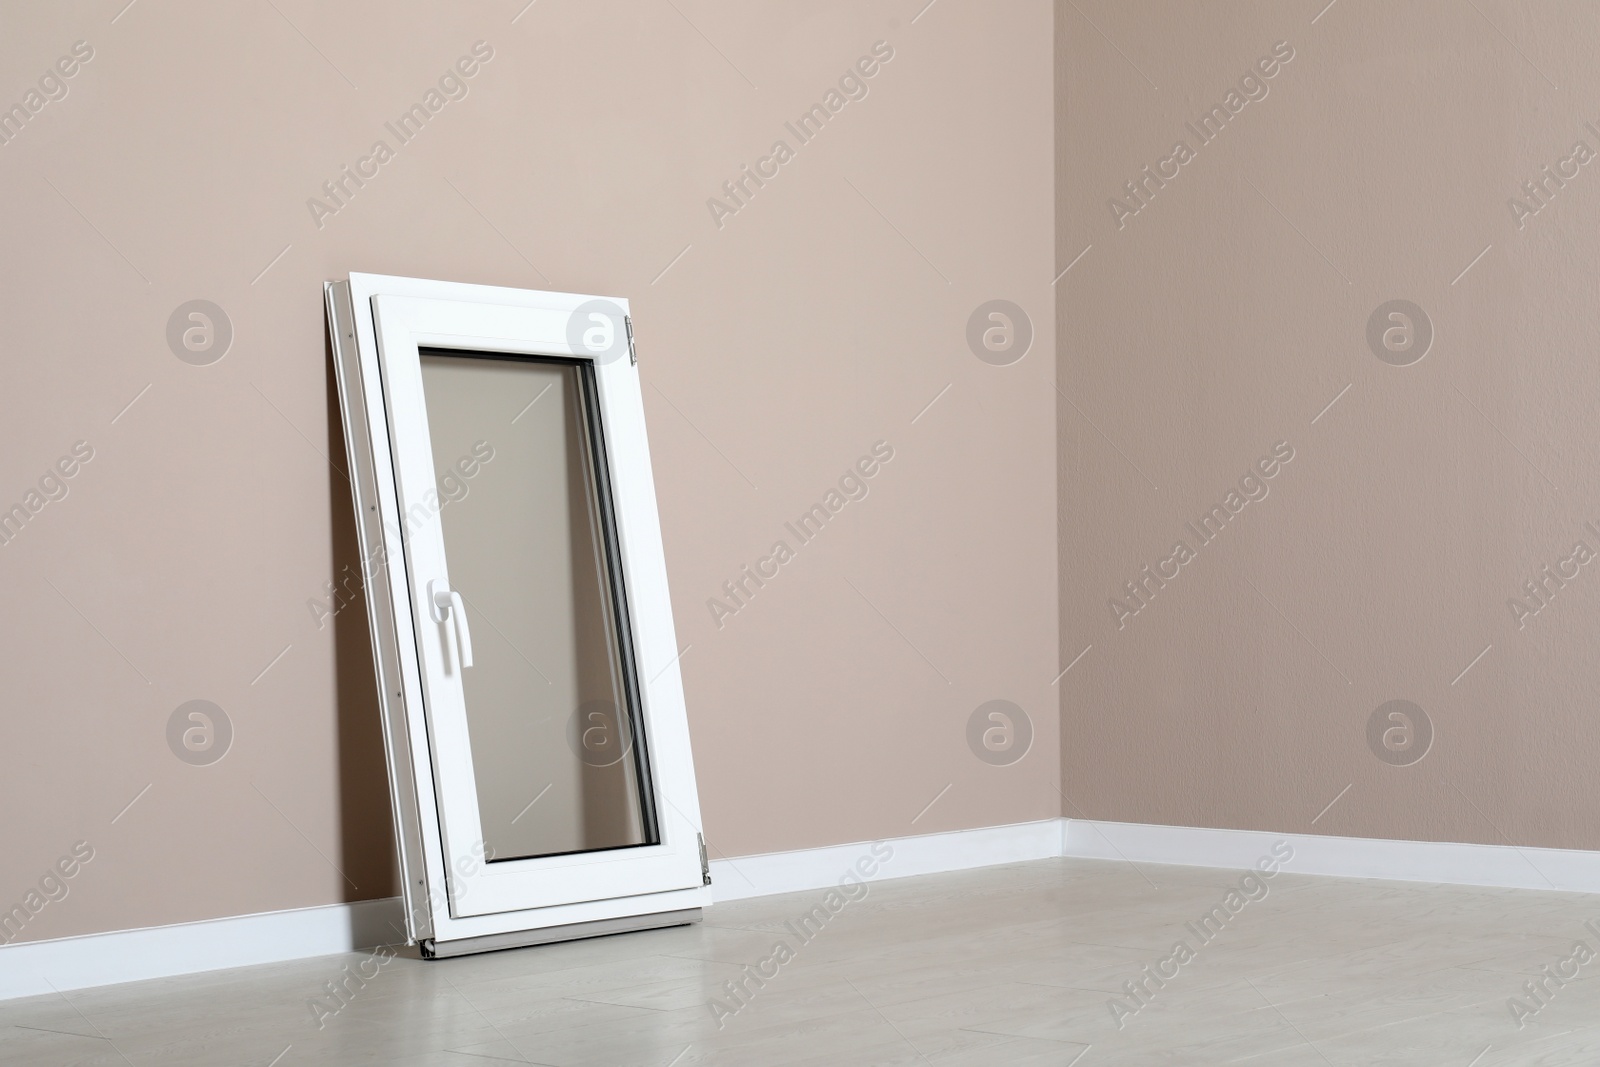 Photo of Modern single casement window near beige wall indoors, space for text